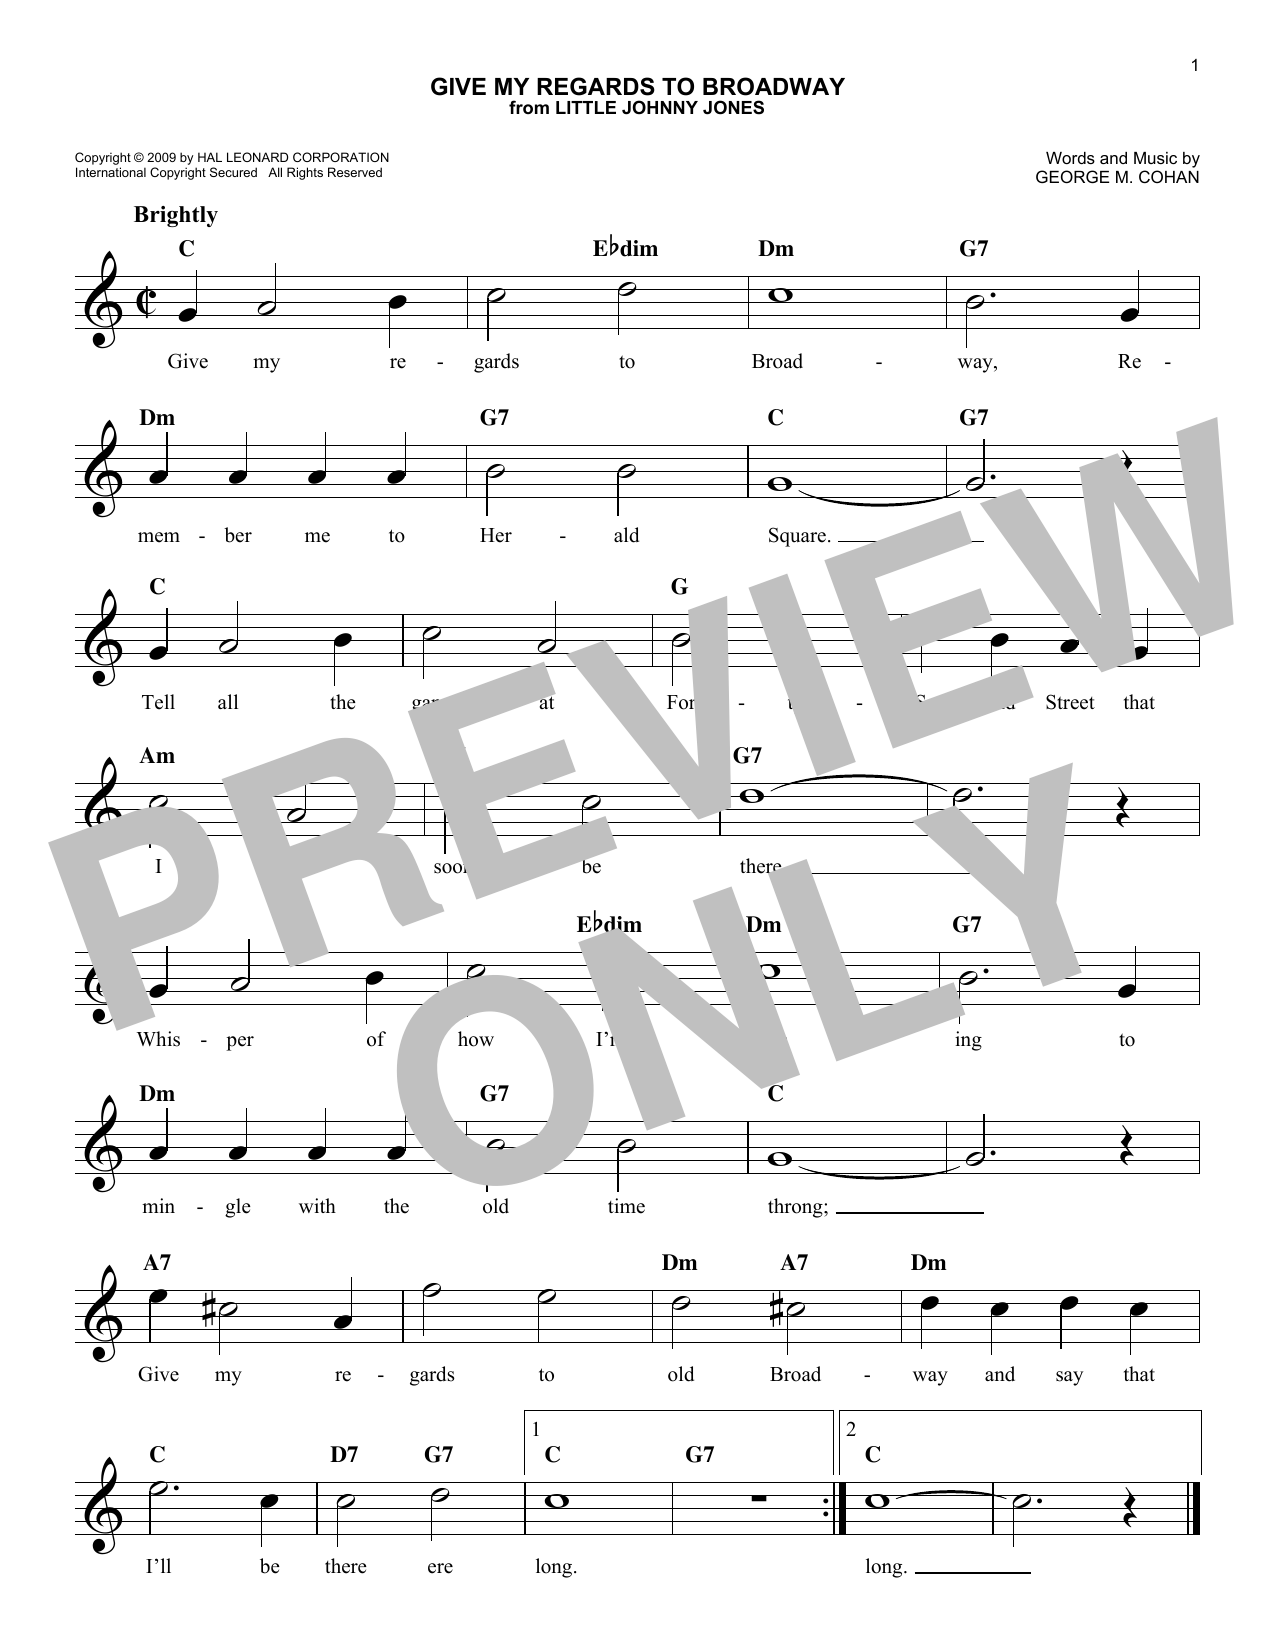 Download George M. Cohan Give My Regards To Broadway Sheet Music